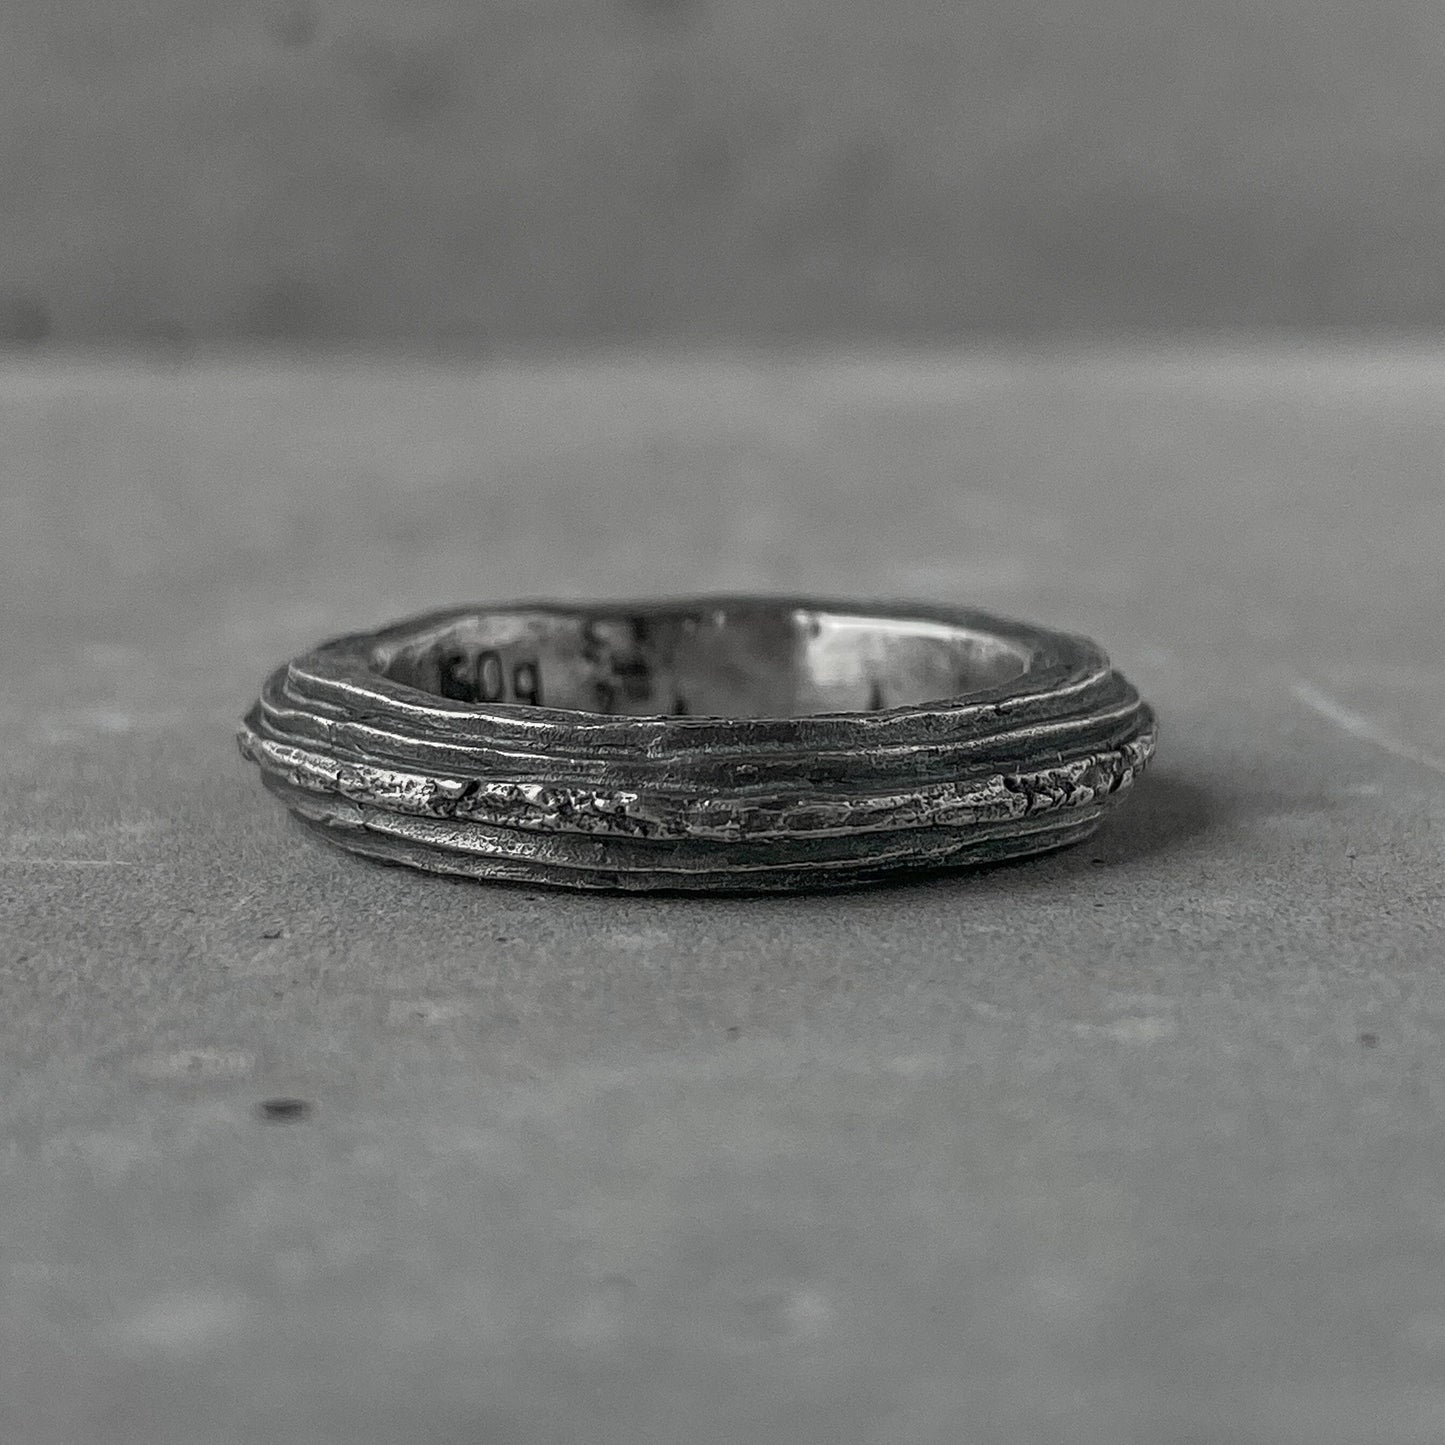 Orbit ring- thin ring with unusual handcrafted texture Band rings Project50g 